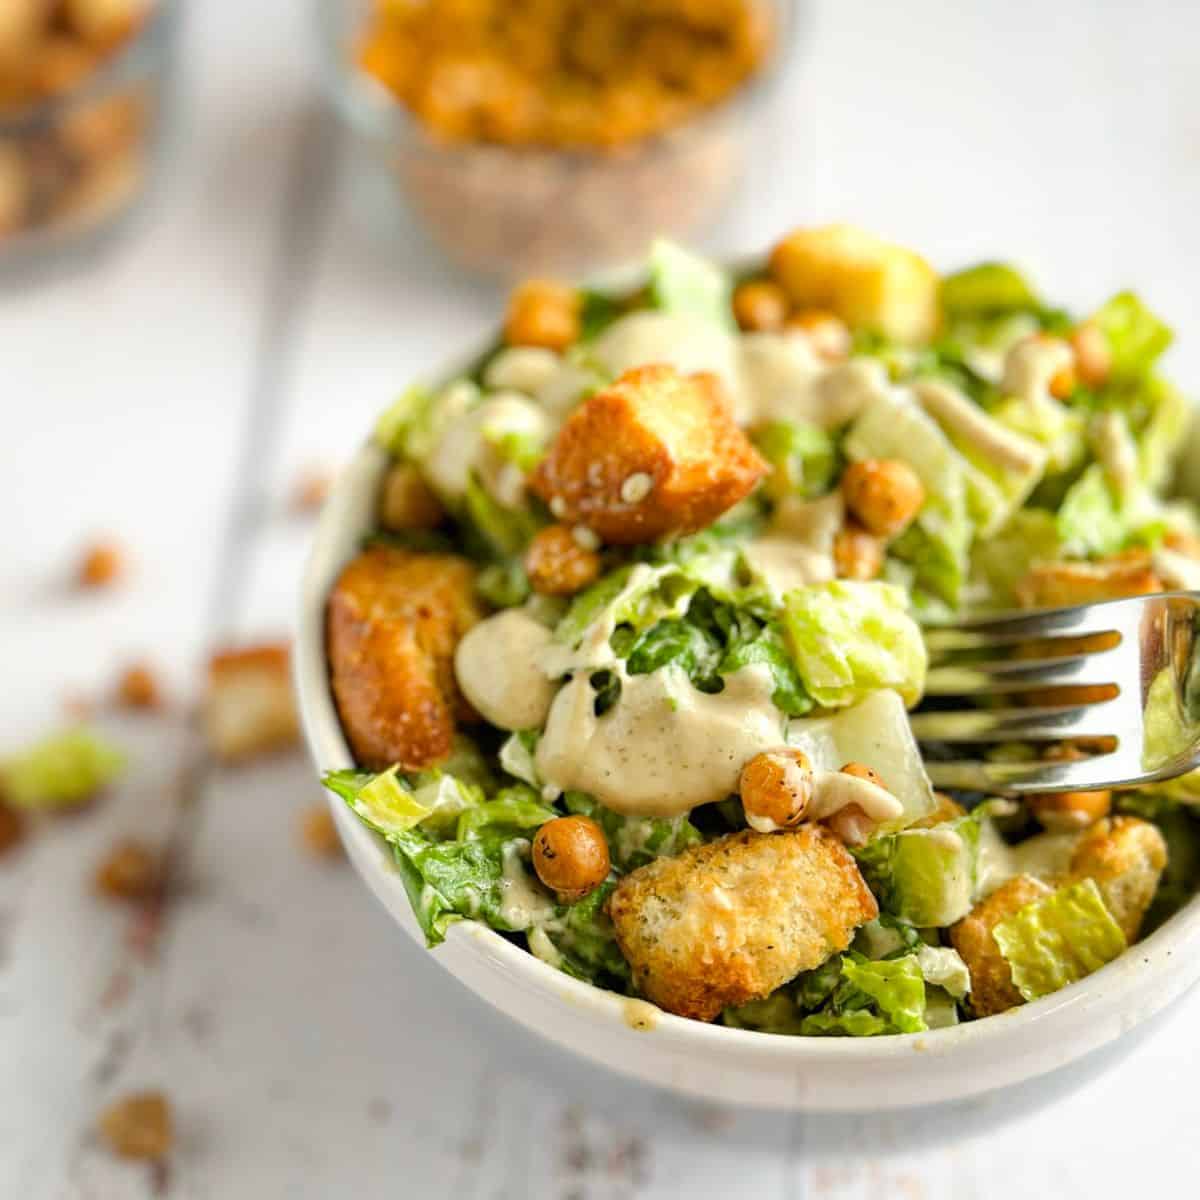 A Vegan Caesar Salad in a bowl with a fork.